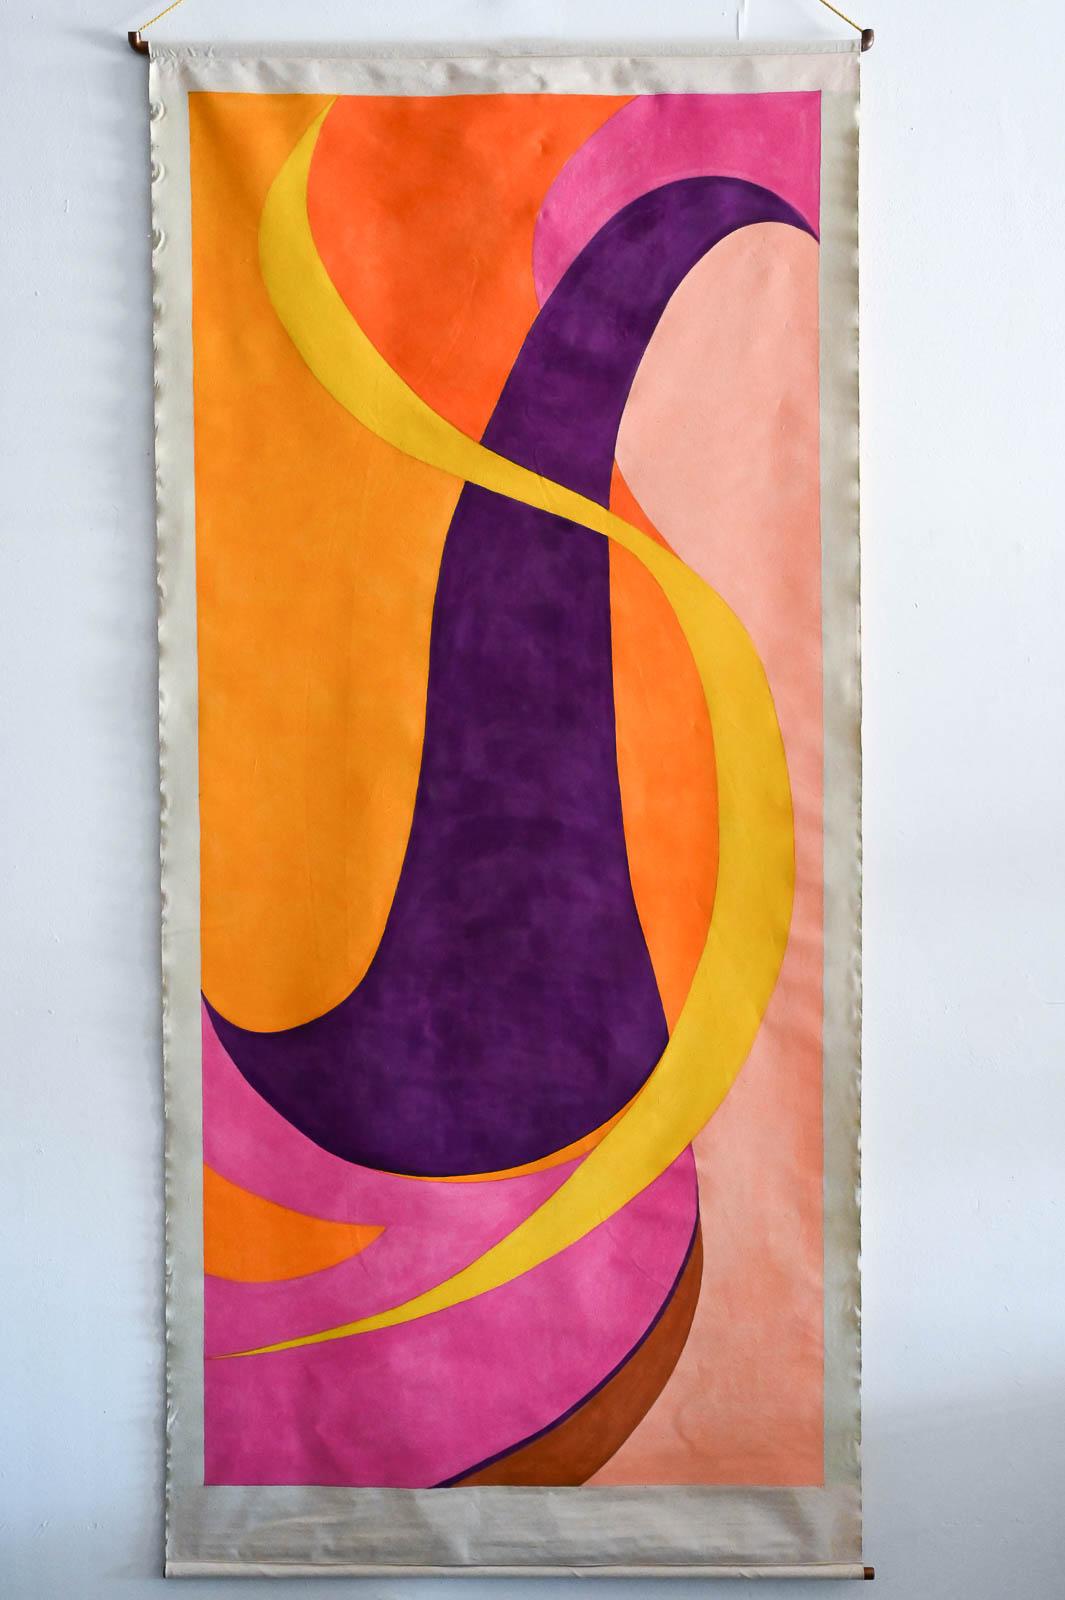 Painted canvas wall hanging by Arizona/California Artist Jean Klafs, 1984. Titled 